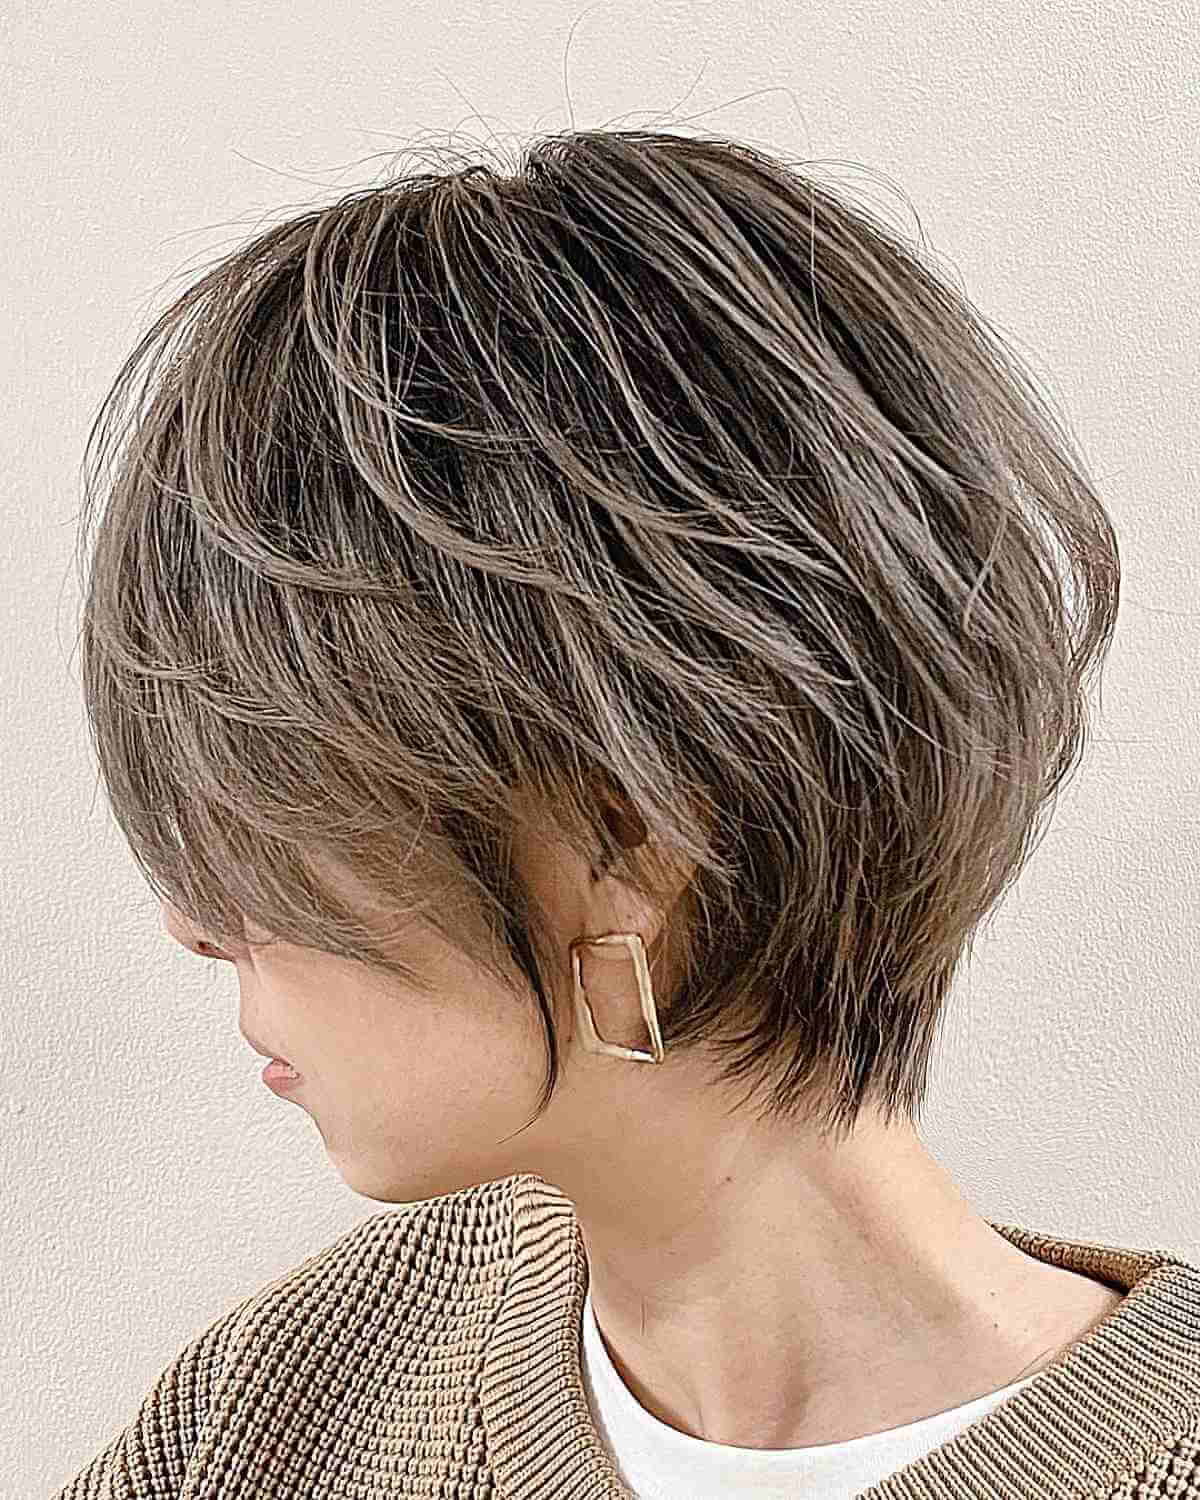 Heres how to tell if short hair will suit you